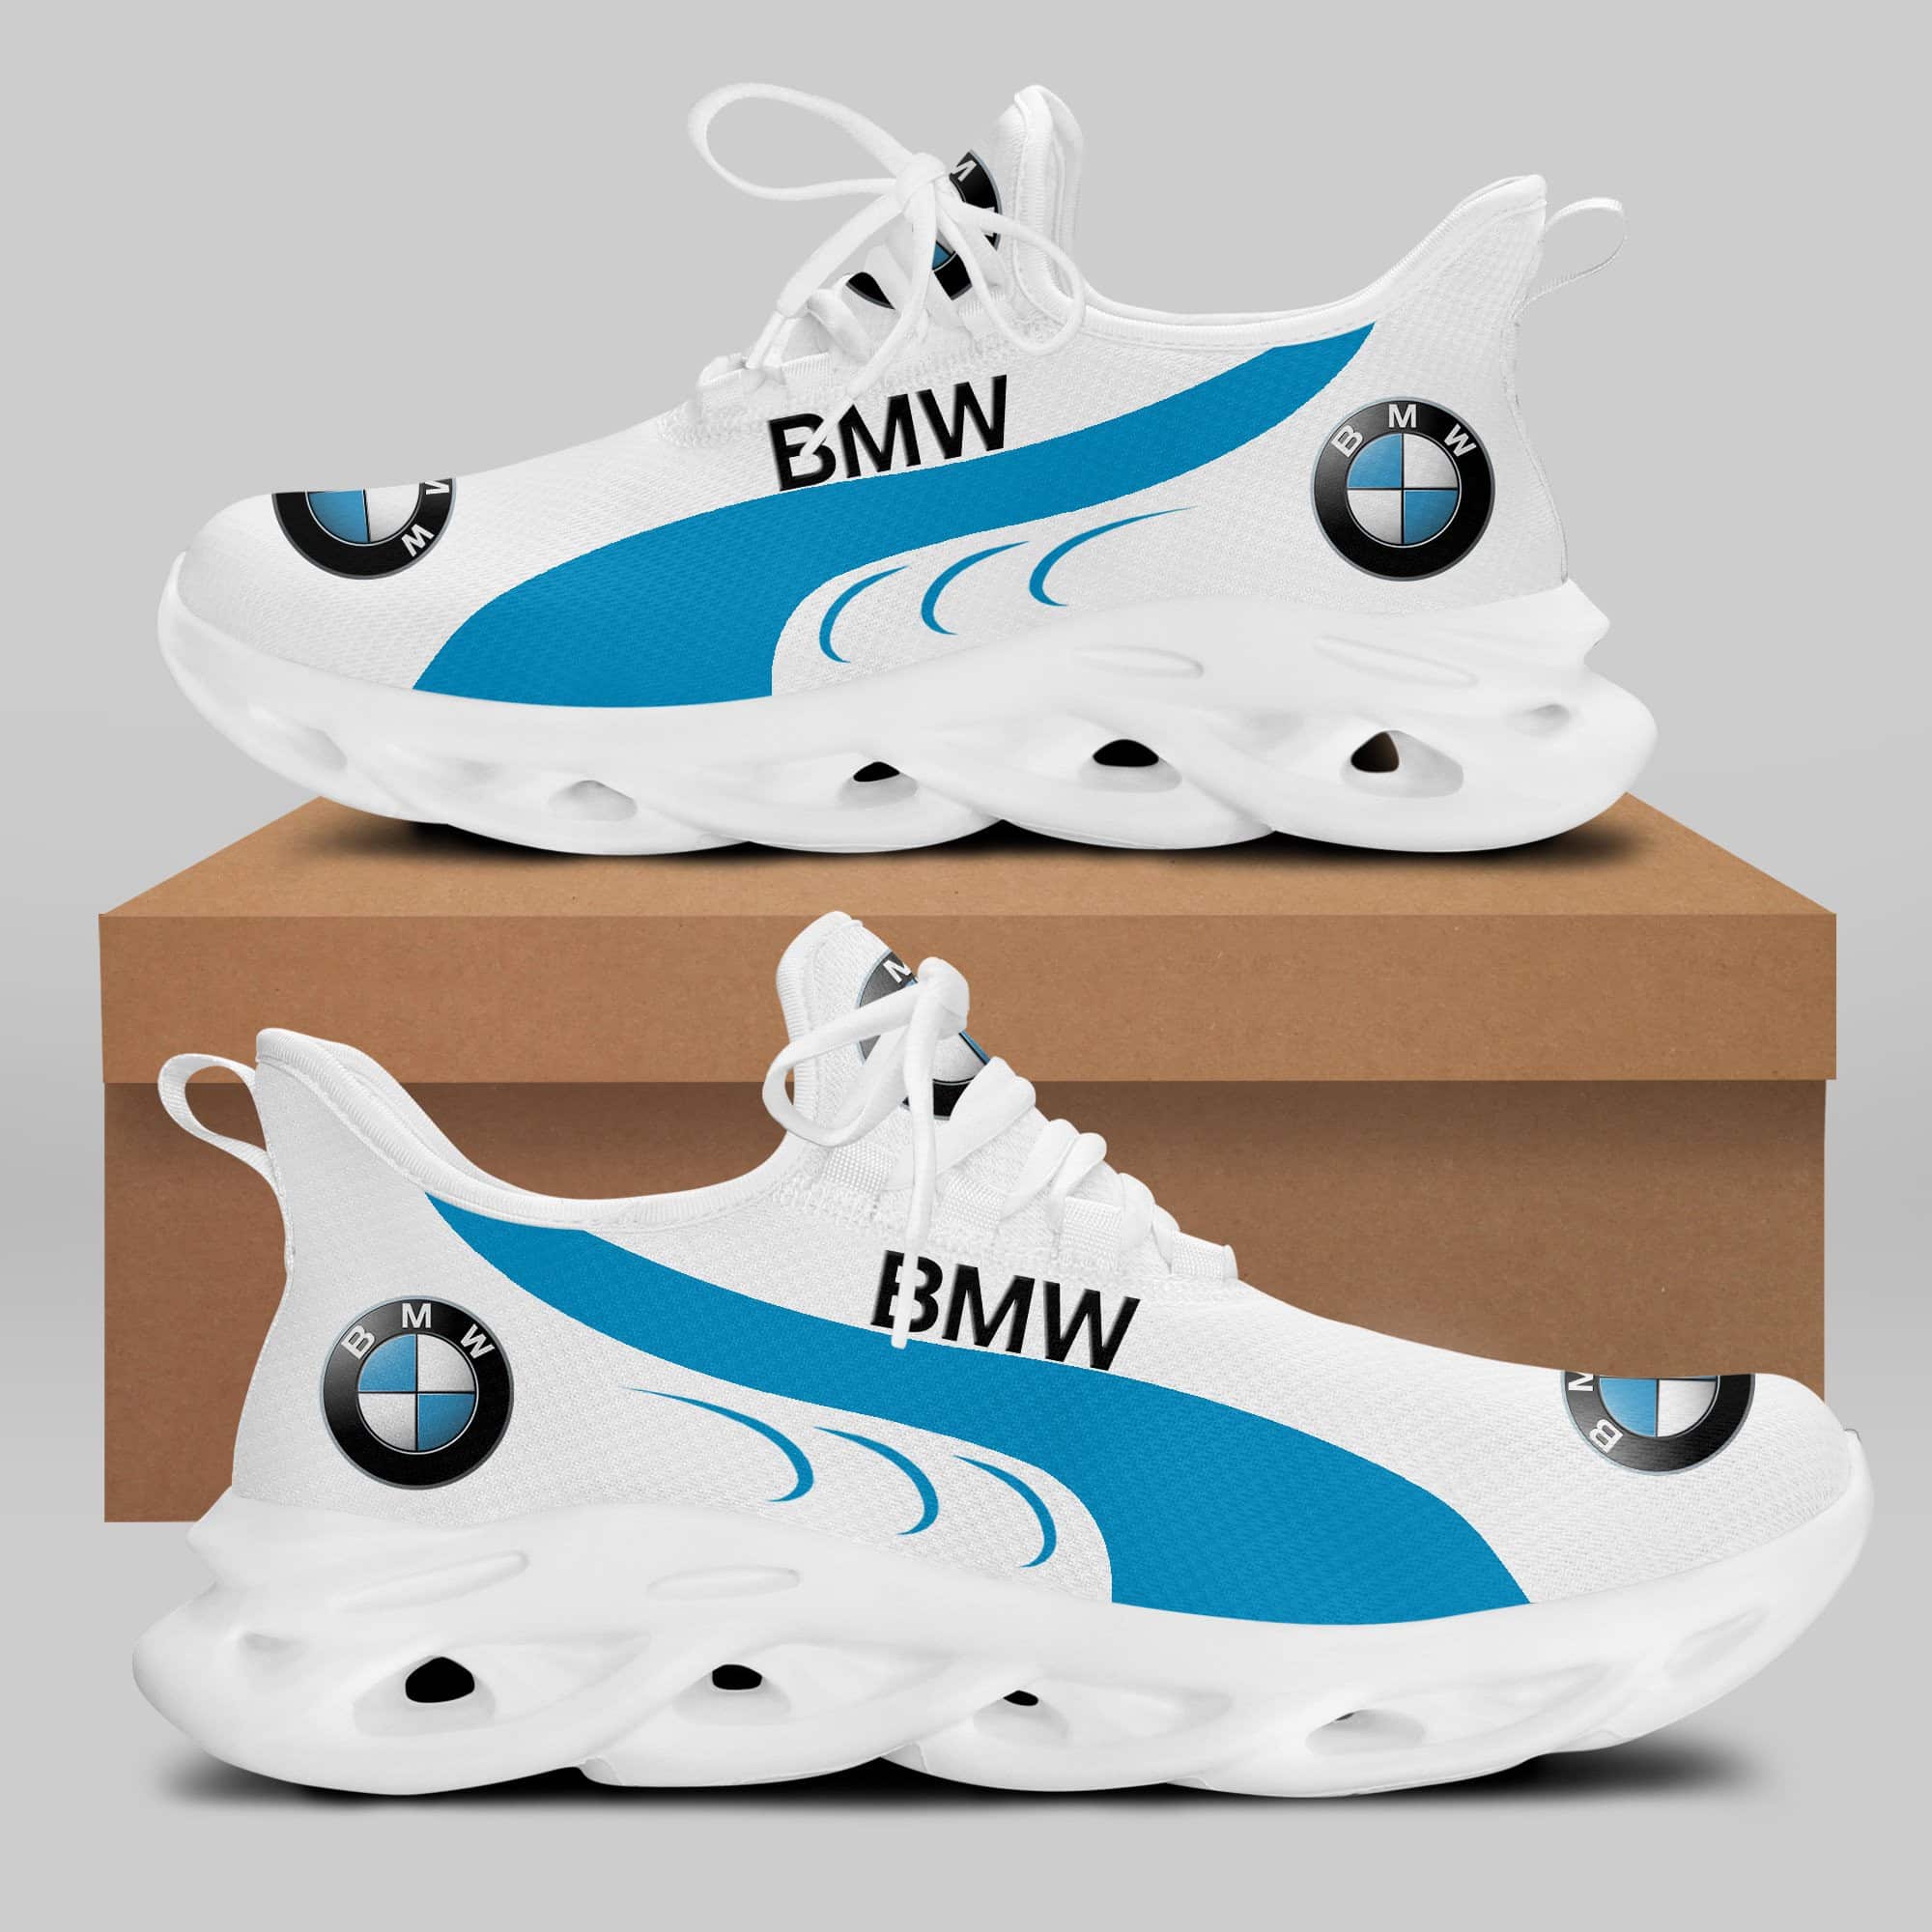 Bmw Running Shoes Max Soul Shoes Sneakers Ver 53 1